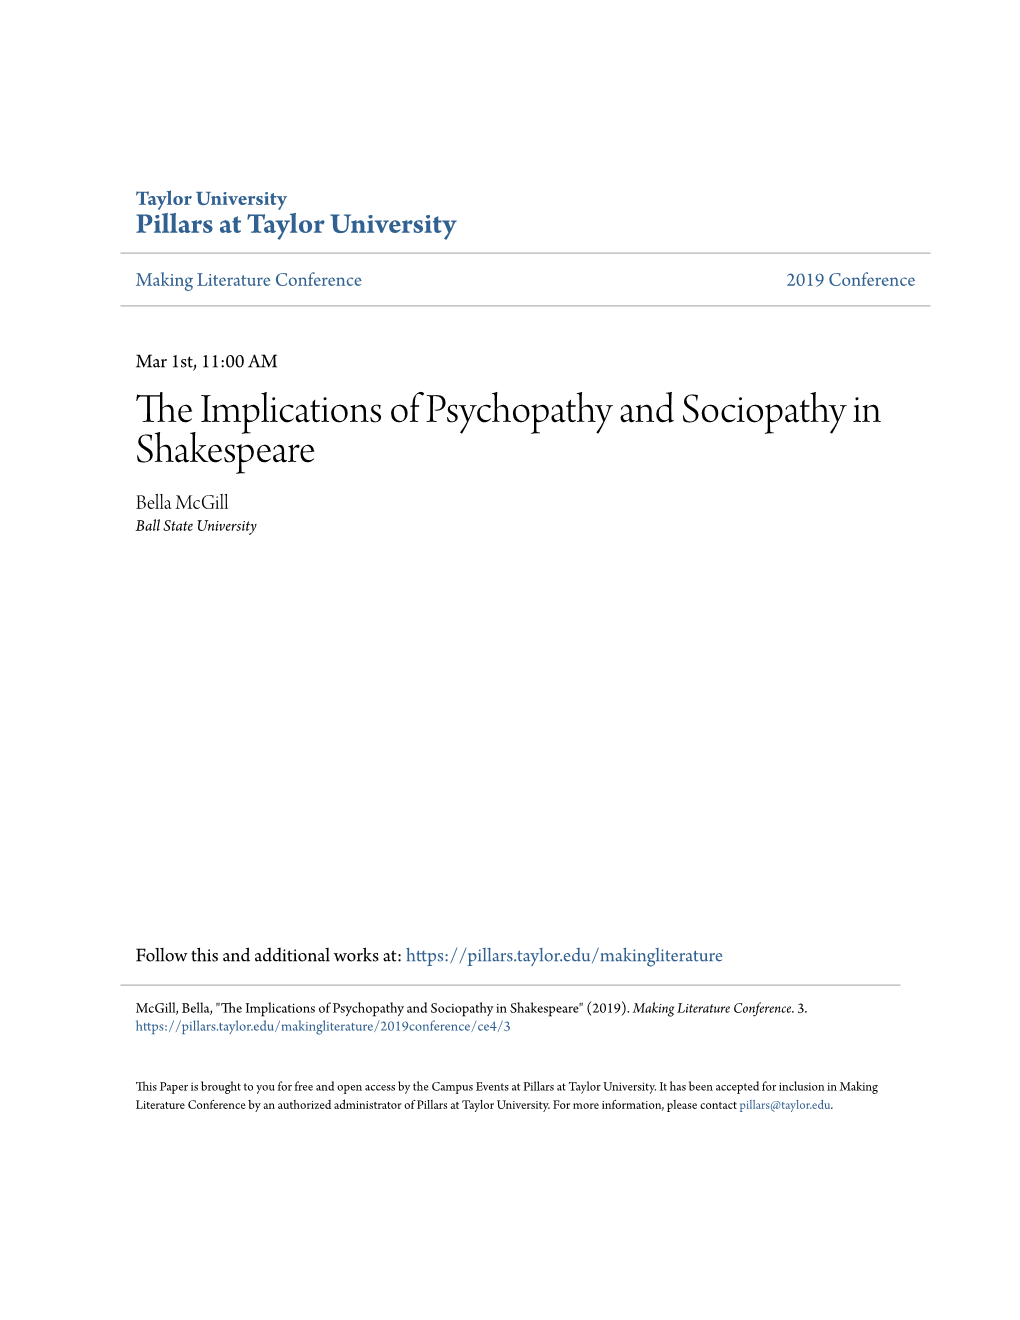 The Implications of Psychopathy and Sociopathy in Shakespeare